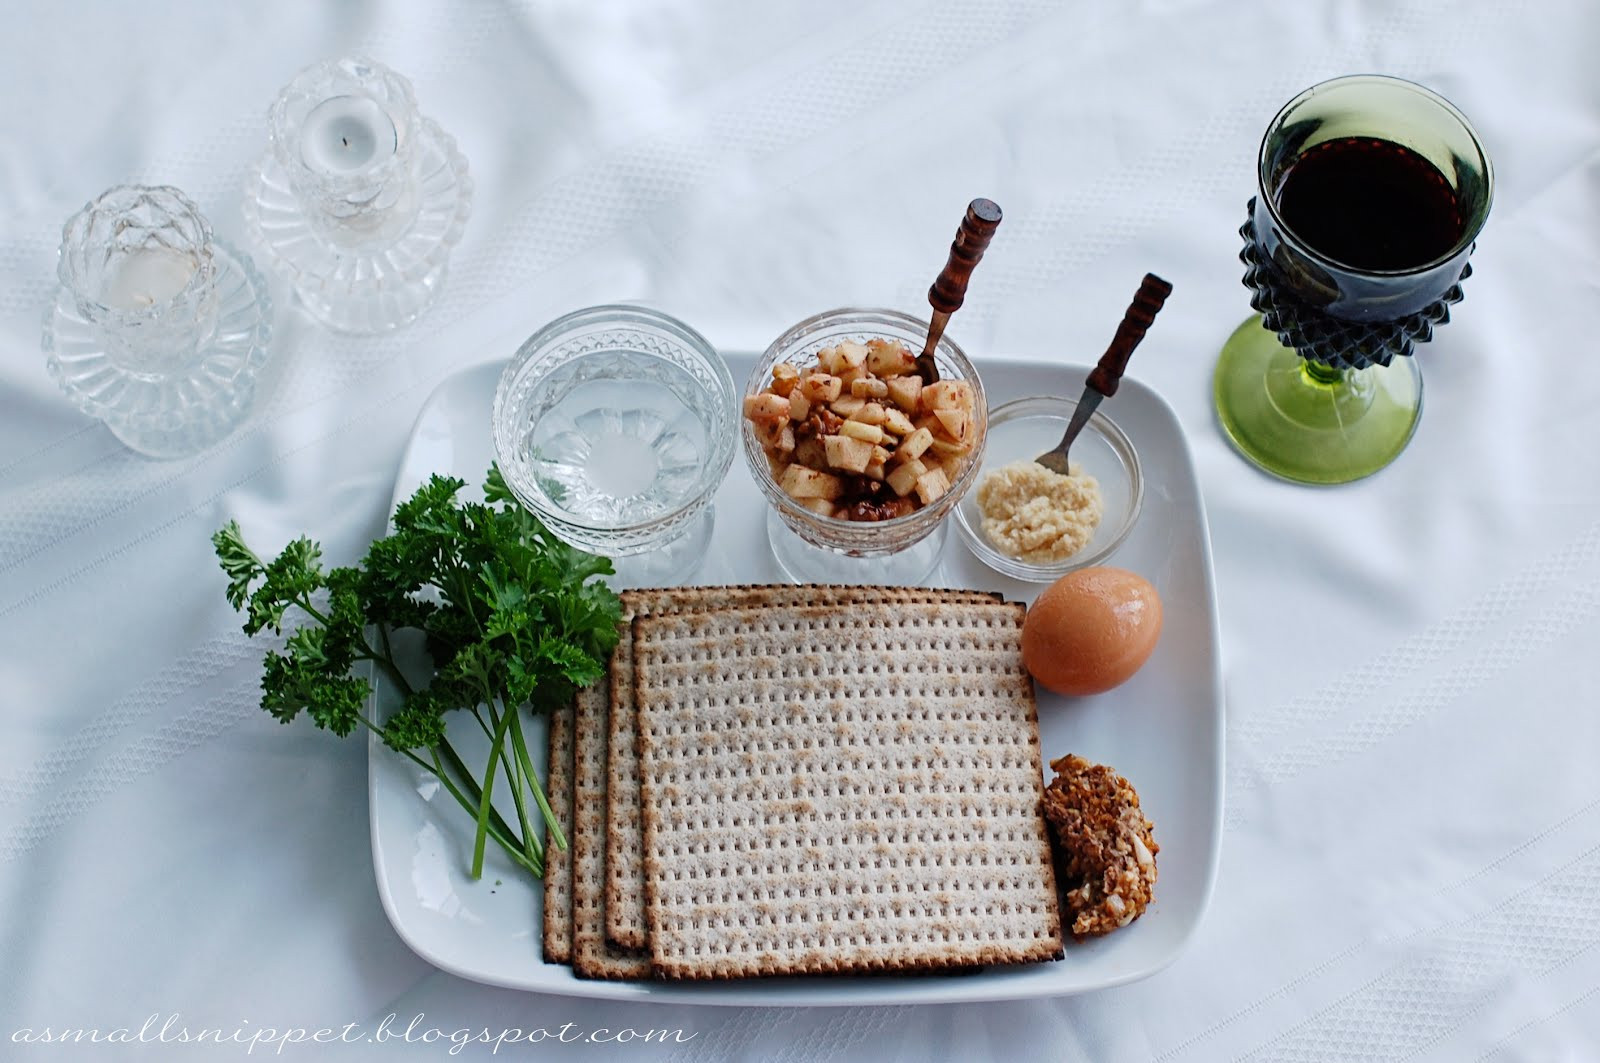 Passover Meals Ideas
 a Christian Passover